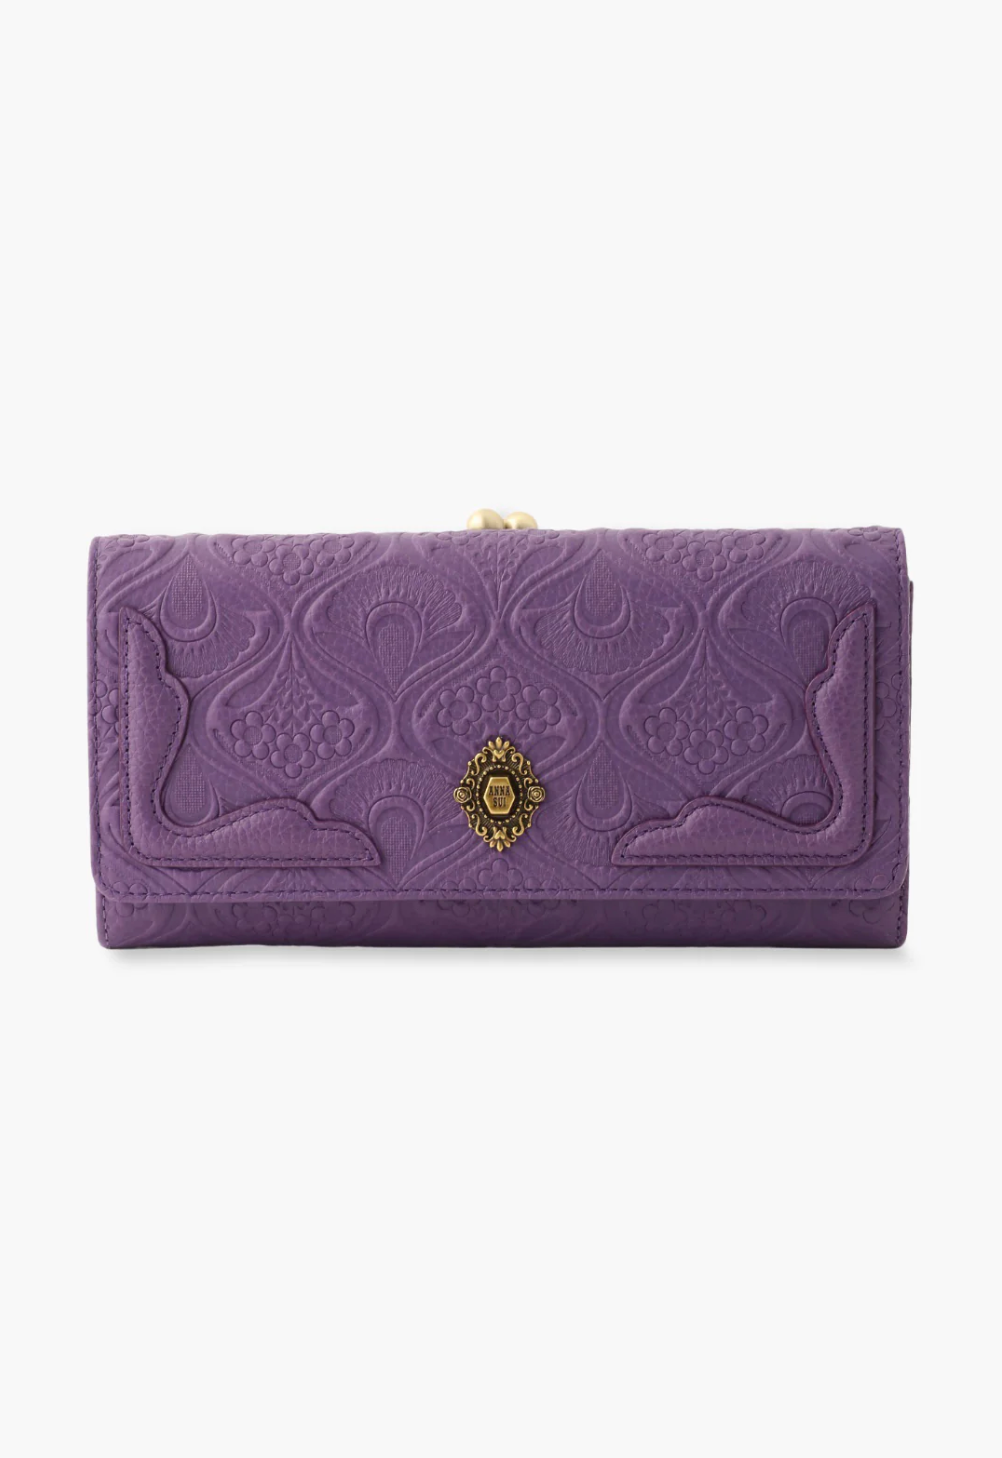 Purple leather wallet, Victorian embossed patterns, vintage Anna Sui logo and kiss lock closure